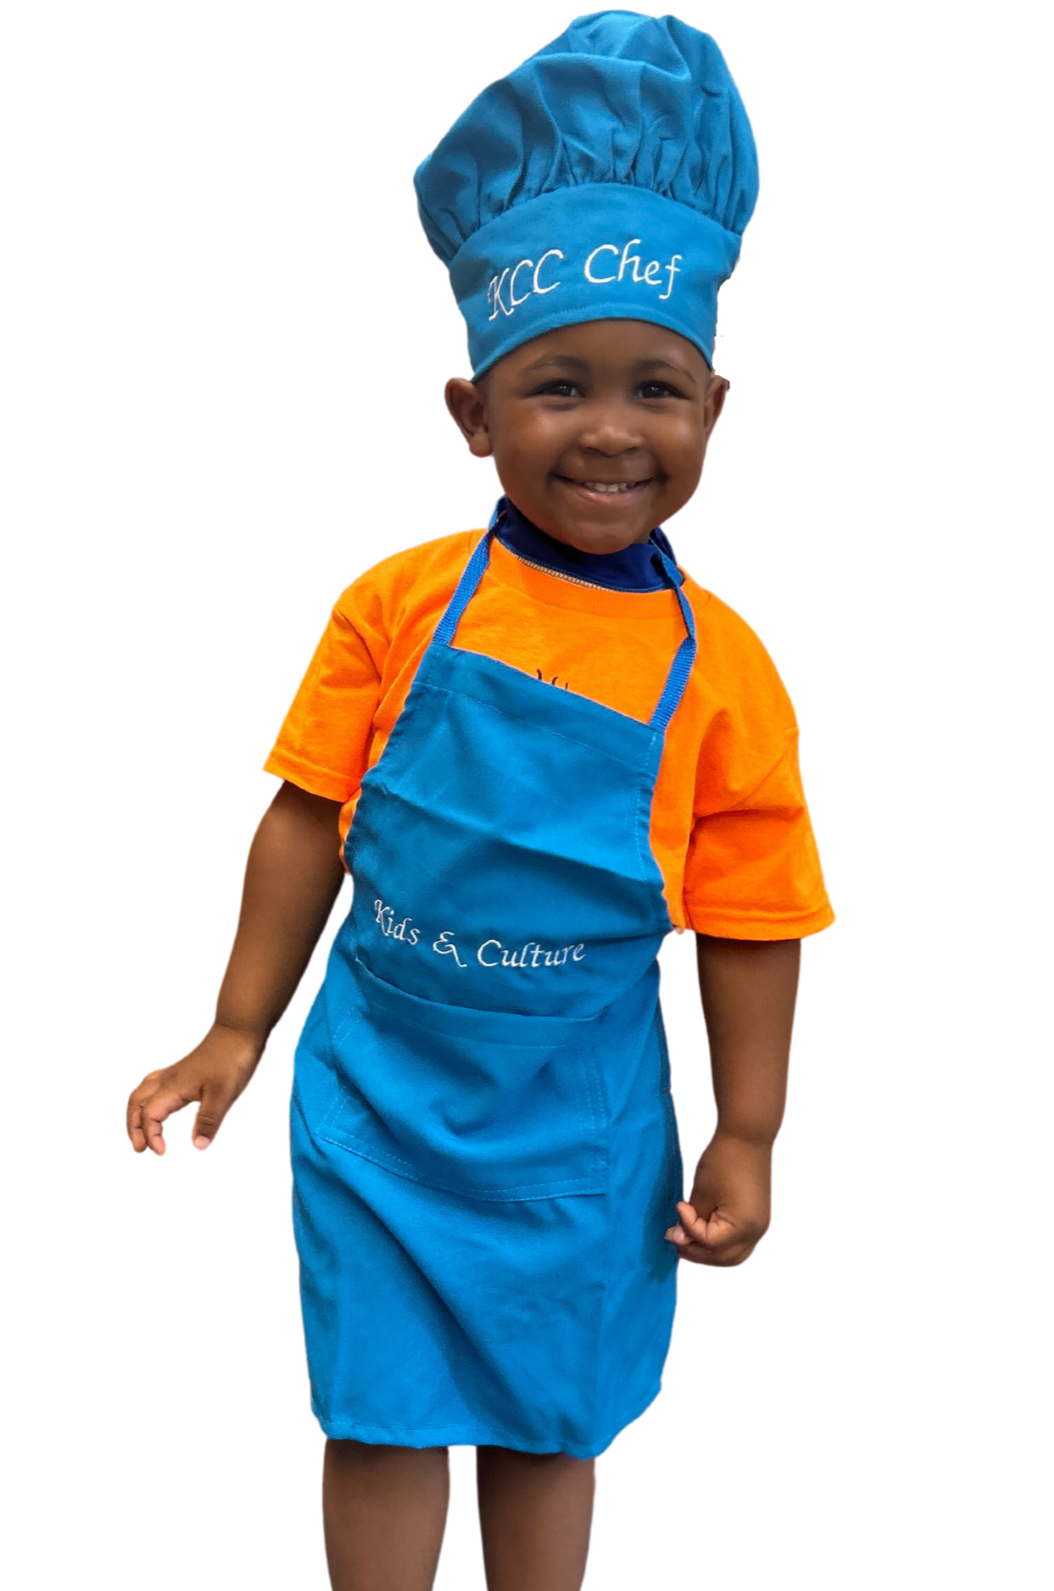 Child pictured wearing KCC arpon and hat set. Custom embroidered chef hat with the words “KCC Chef” on the hat and custom embroidered apron with the words “Kids & Culture” on the matching apron. The words are embroidered in white elegant font letters. The apron has a pocket on the front of the apron. Each hat is adjustable using velcro. The aprons and hats come in orange, red, turquoise, and hot pink